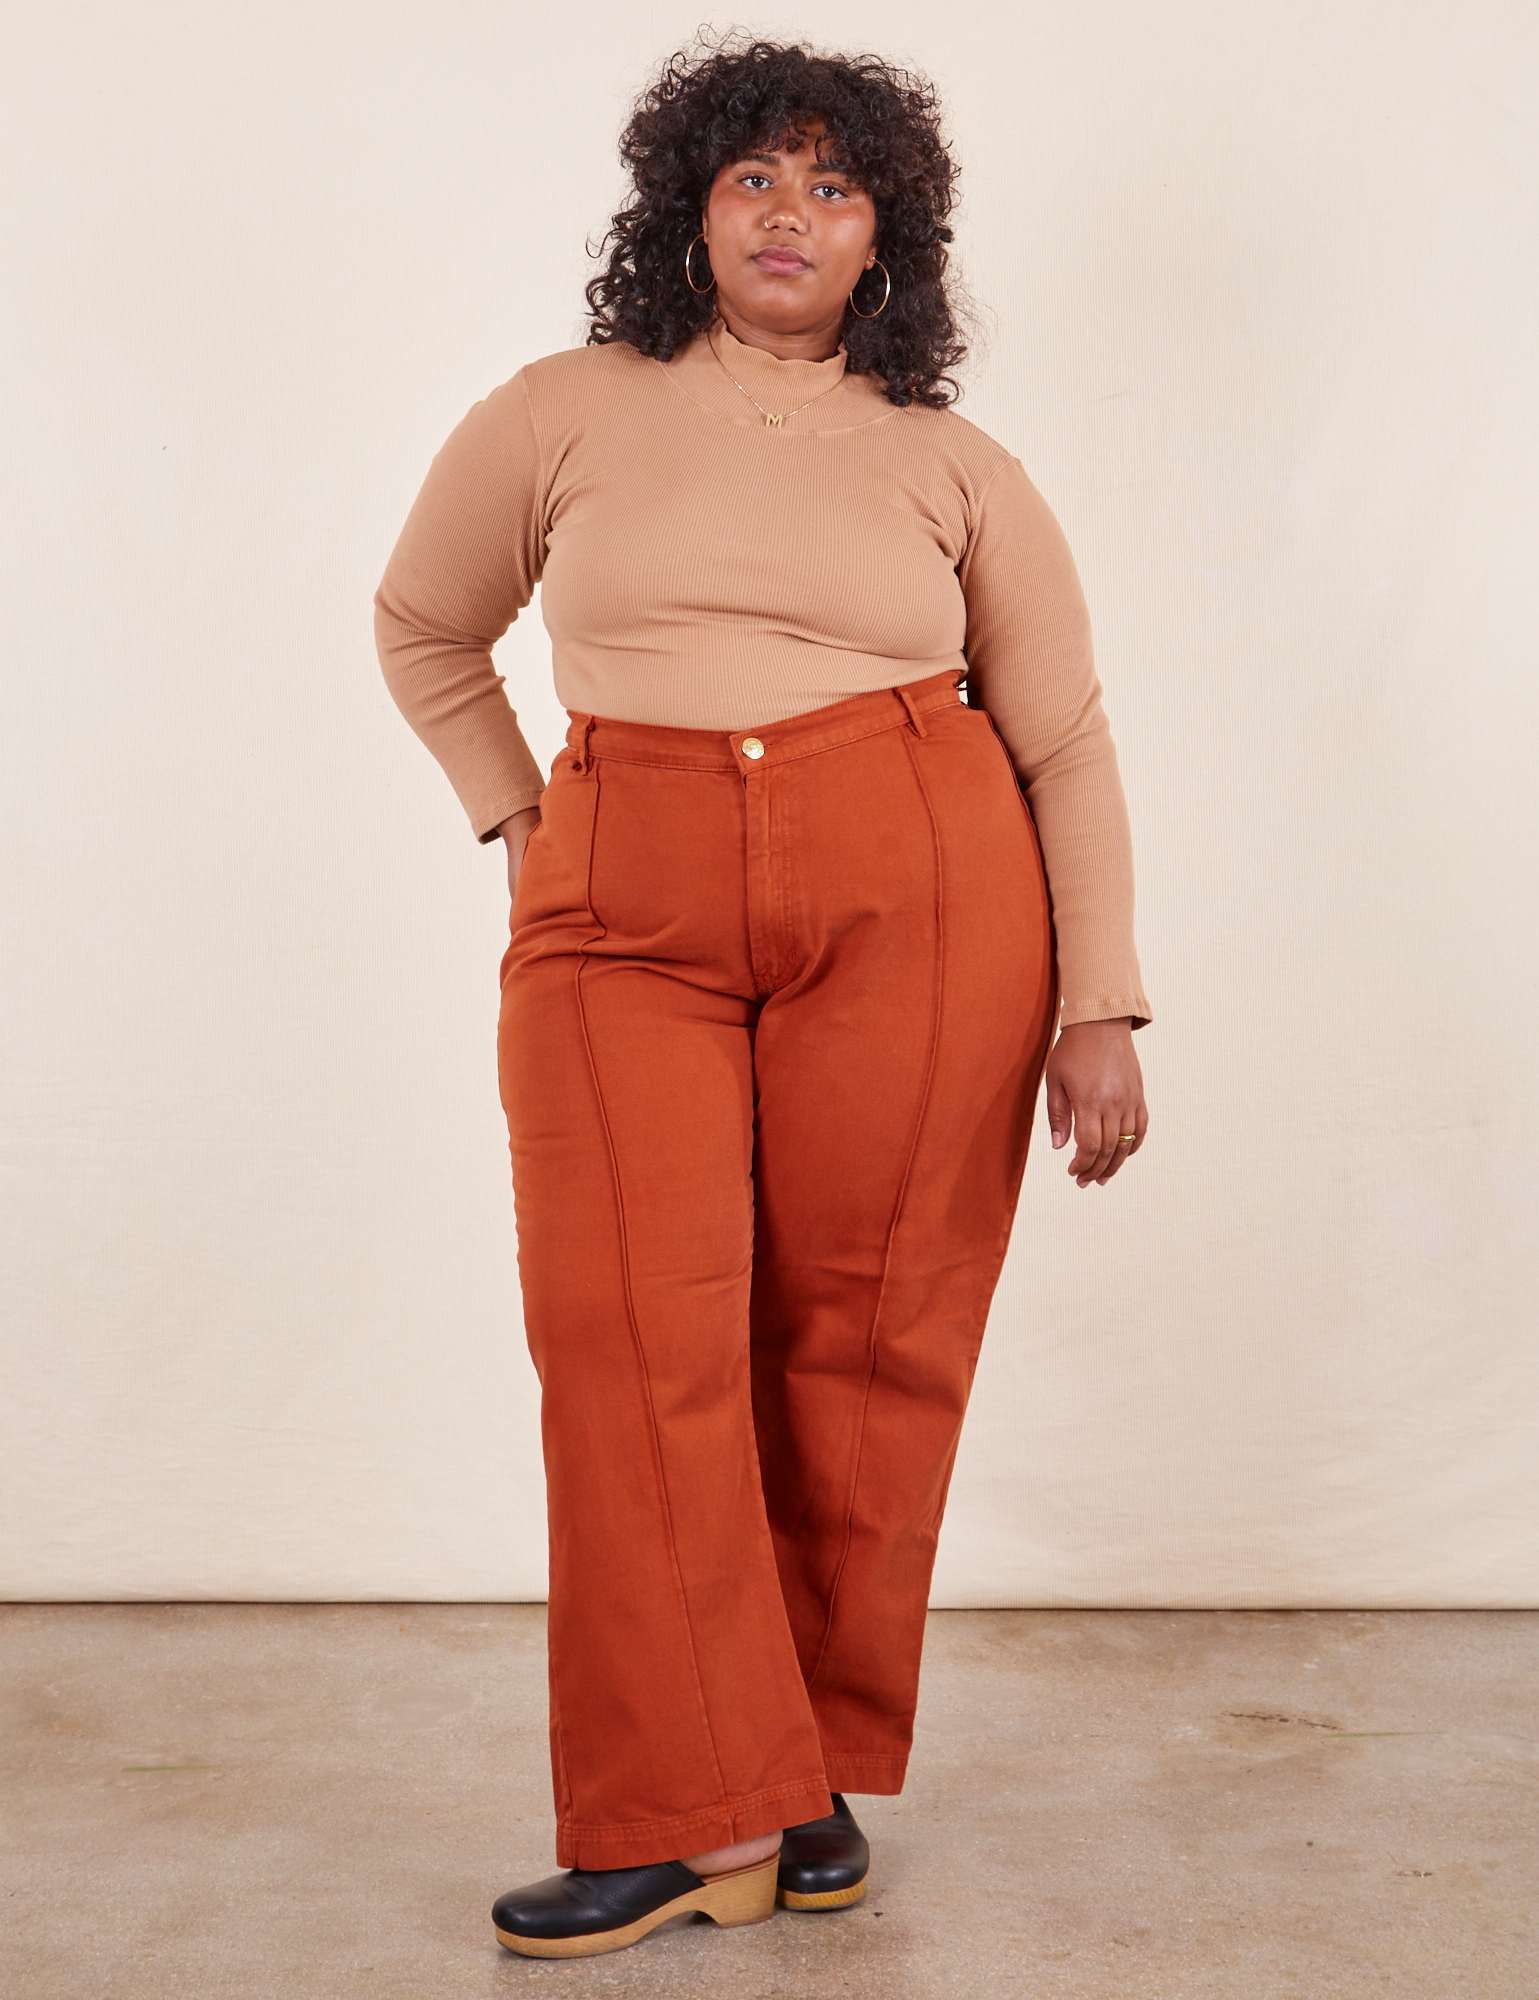 Morgan is 5&#39;5&quot; and wearing 1XL Western Pants in Burnt Terracotta and tan Essential Turtleneck